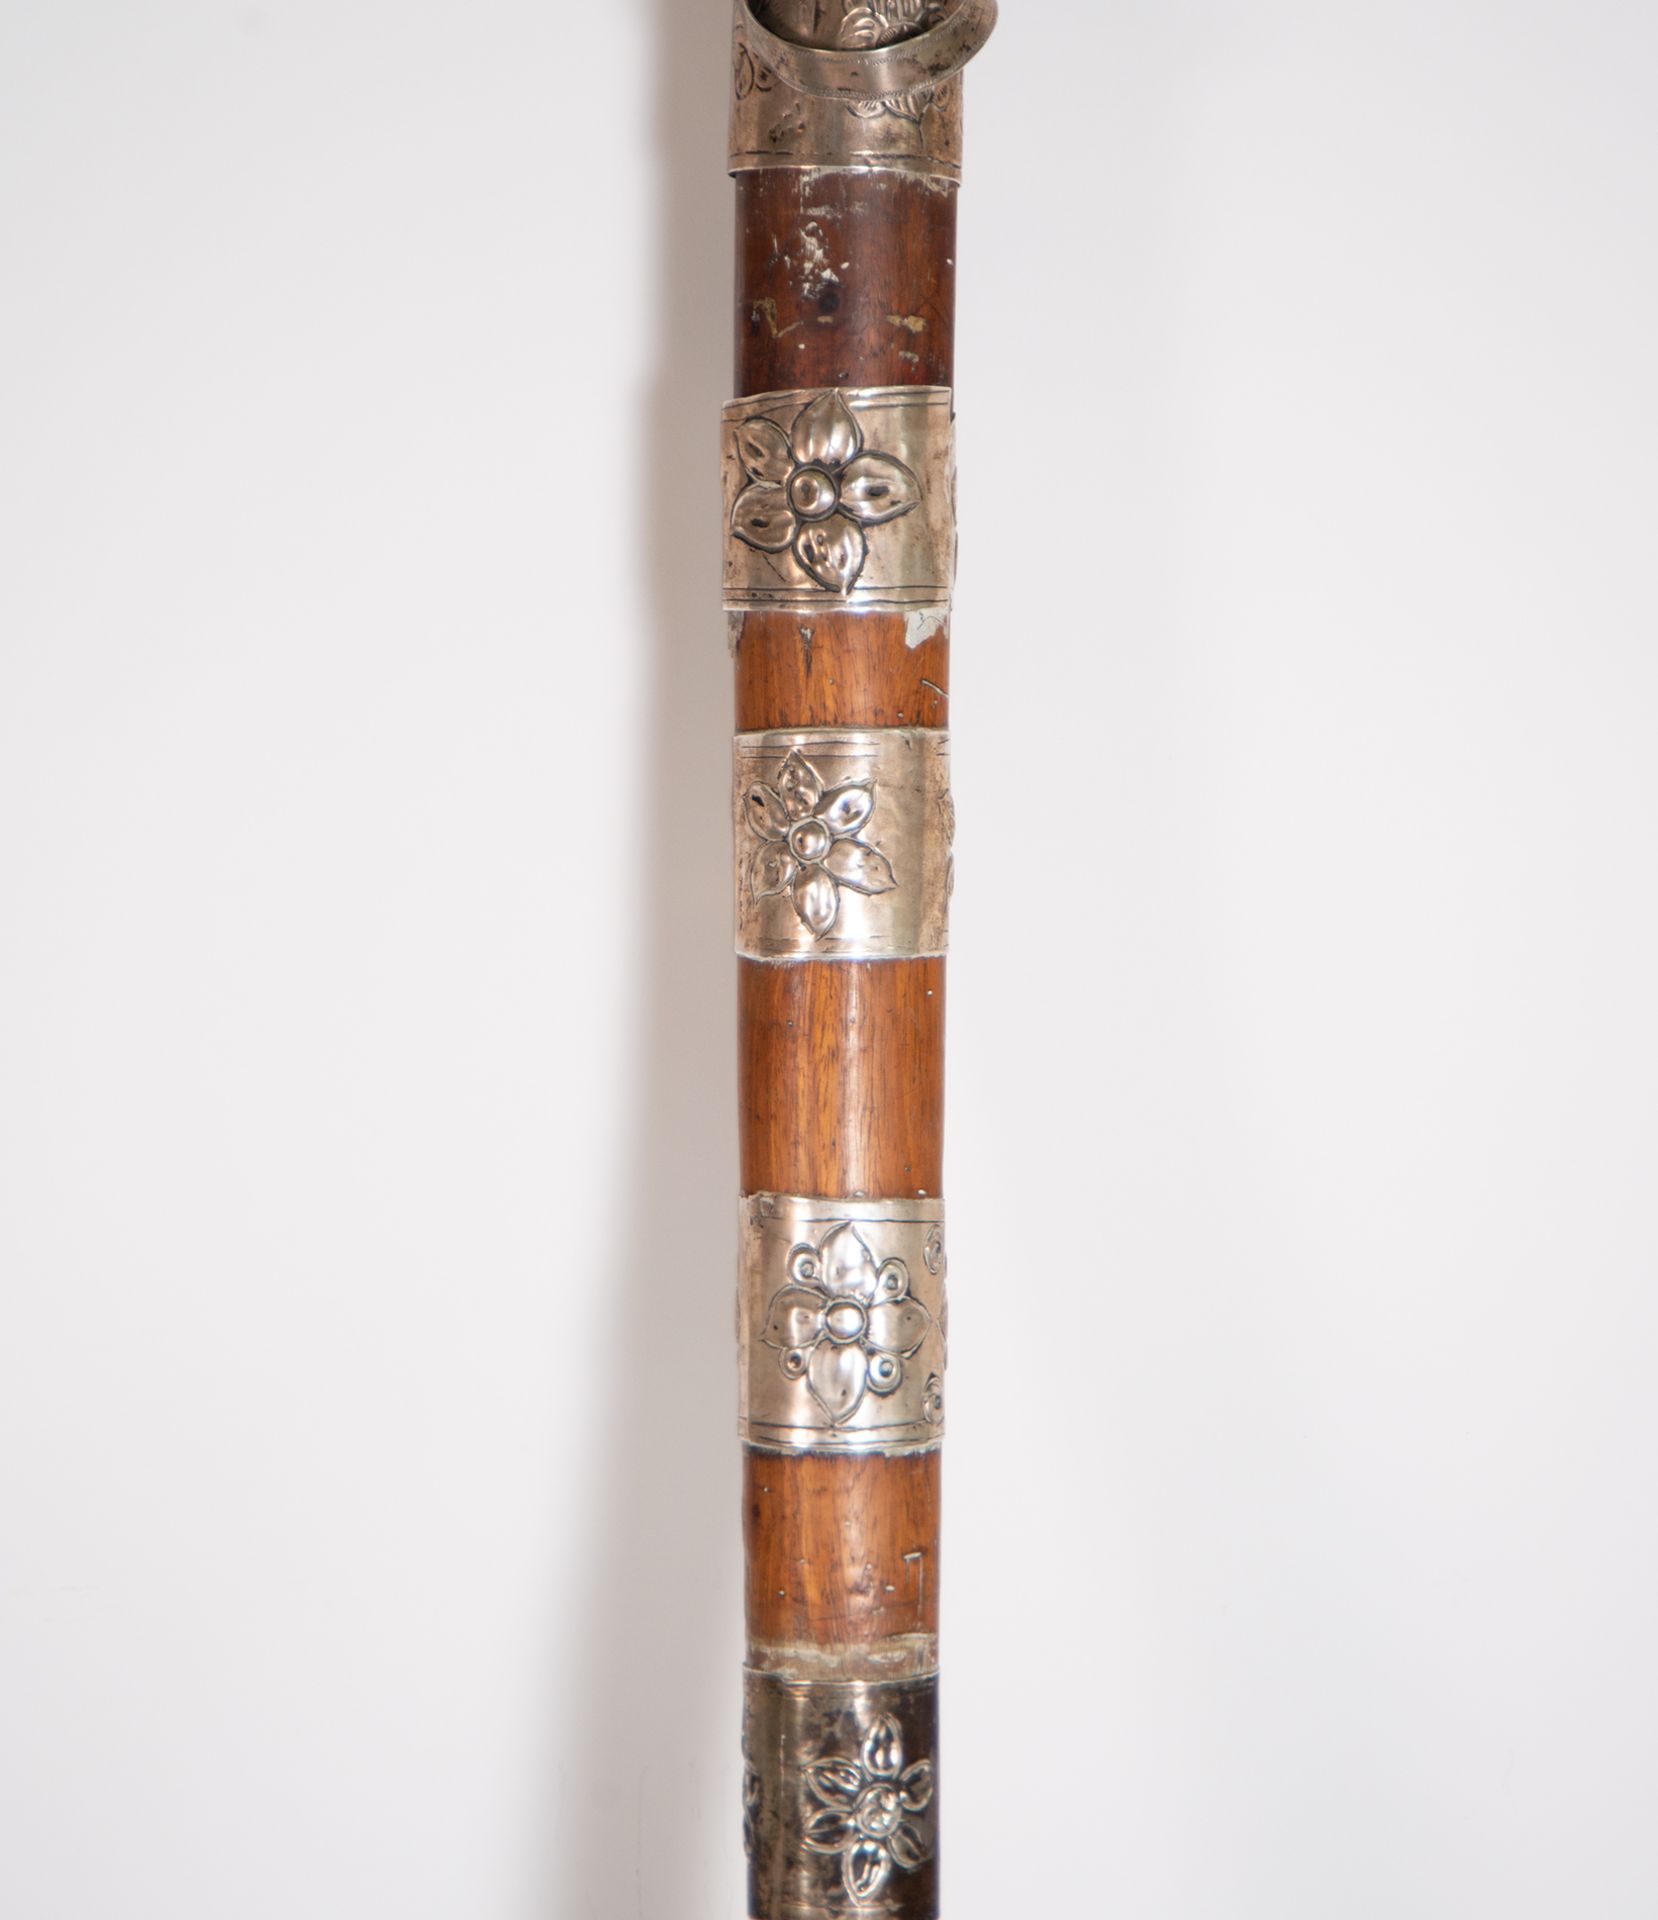 Mayor's baton, Peru, end of the colonial period - beginning of the republican period. 18th - 19th ce - Image 3 of 4